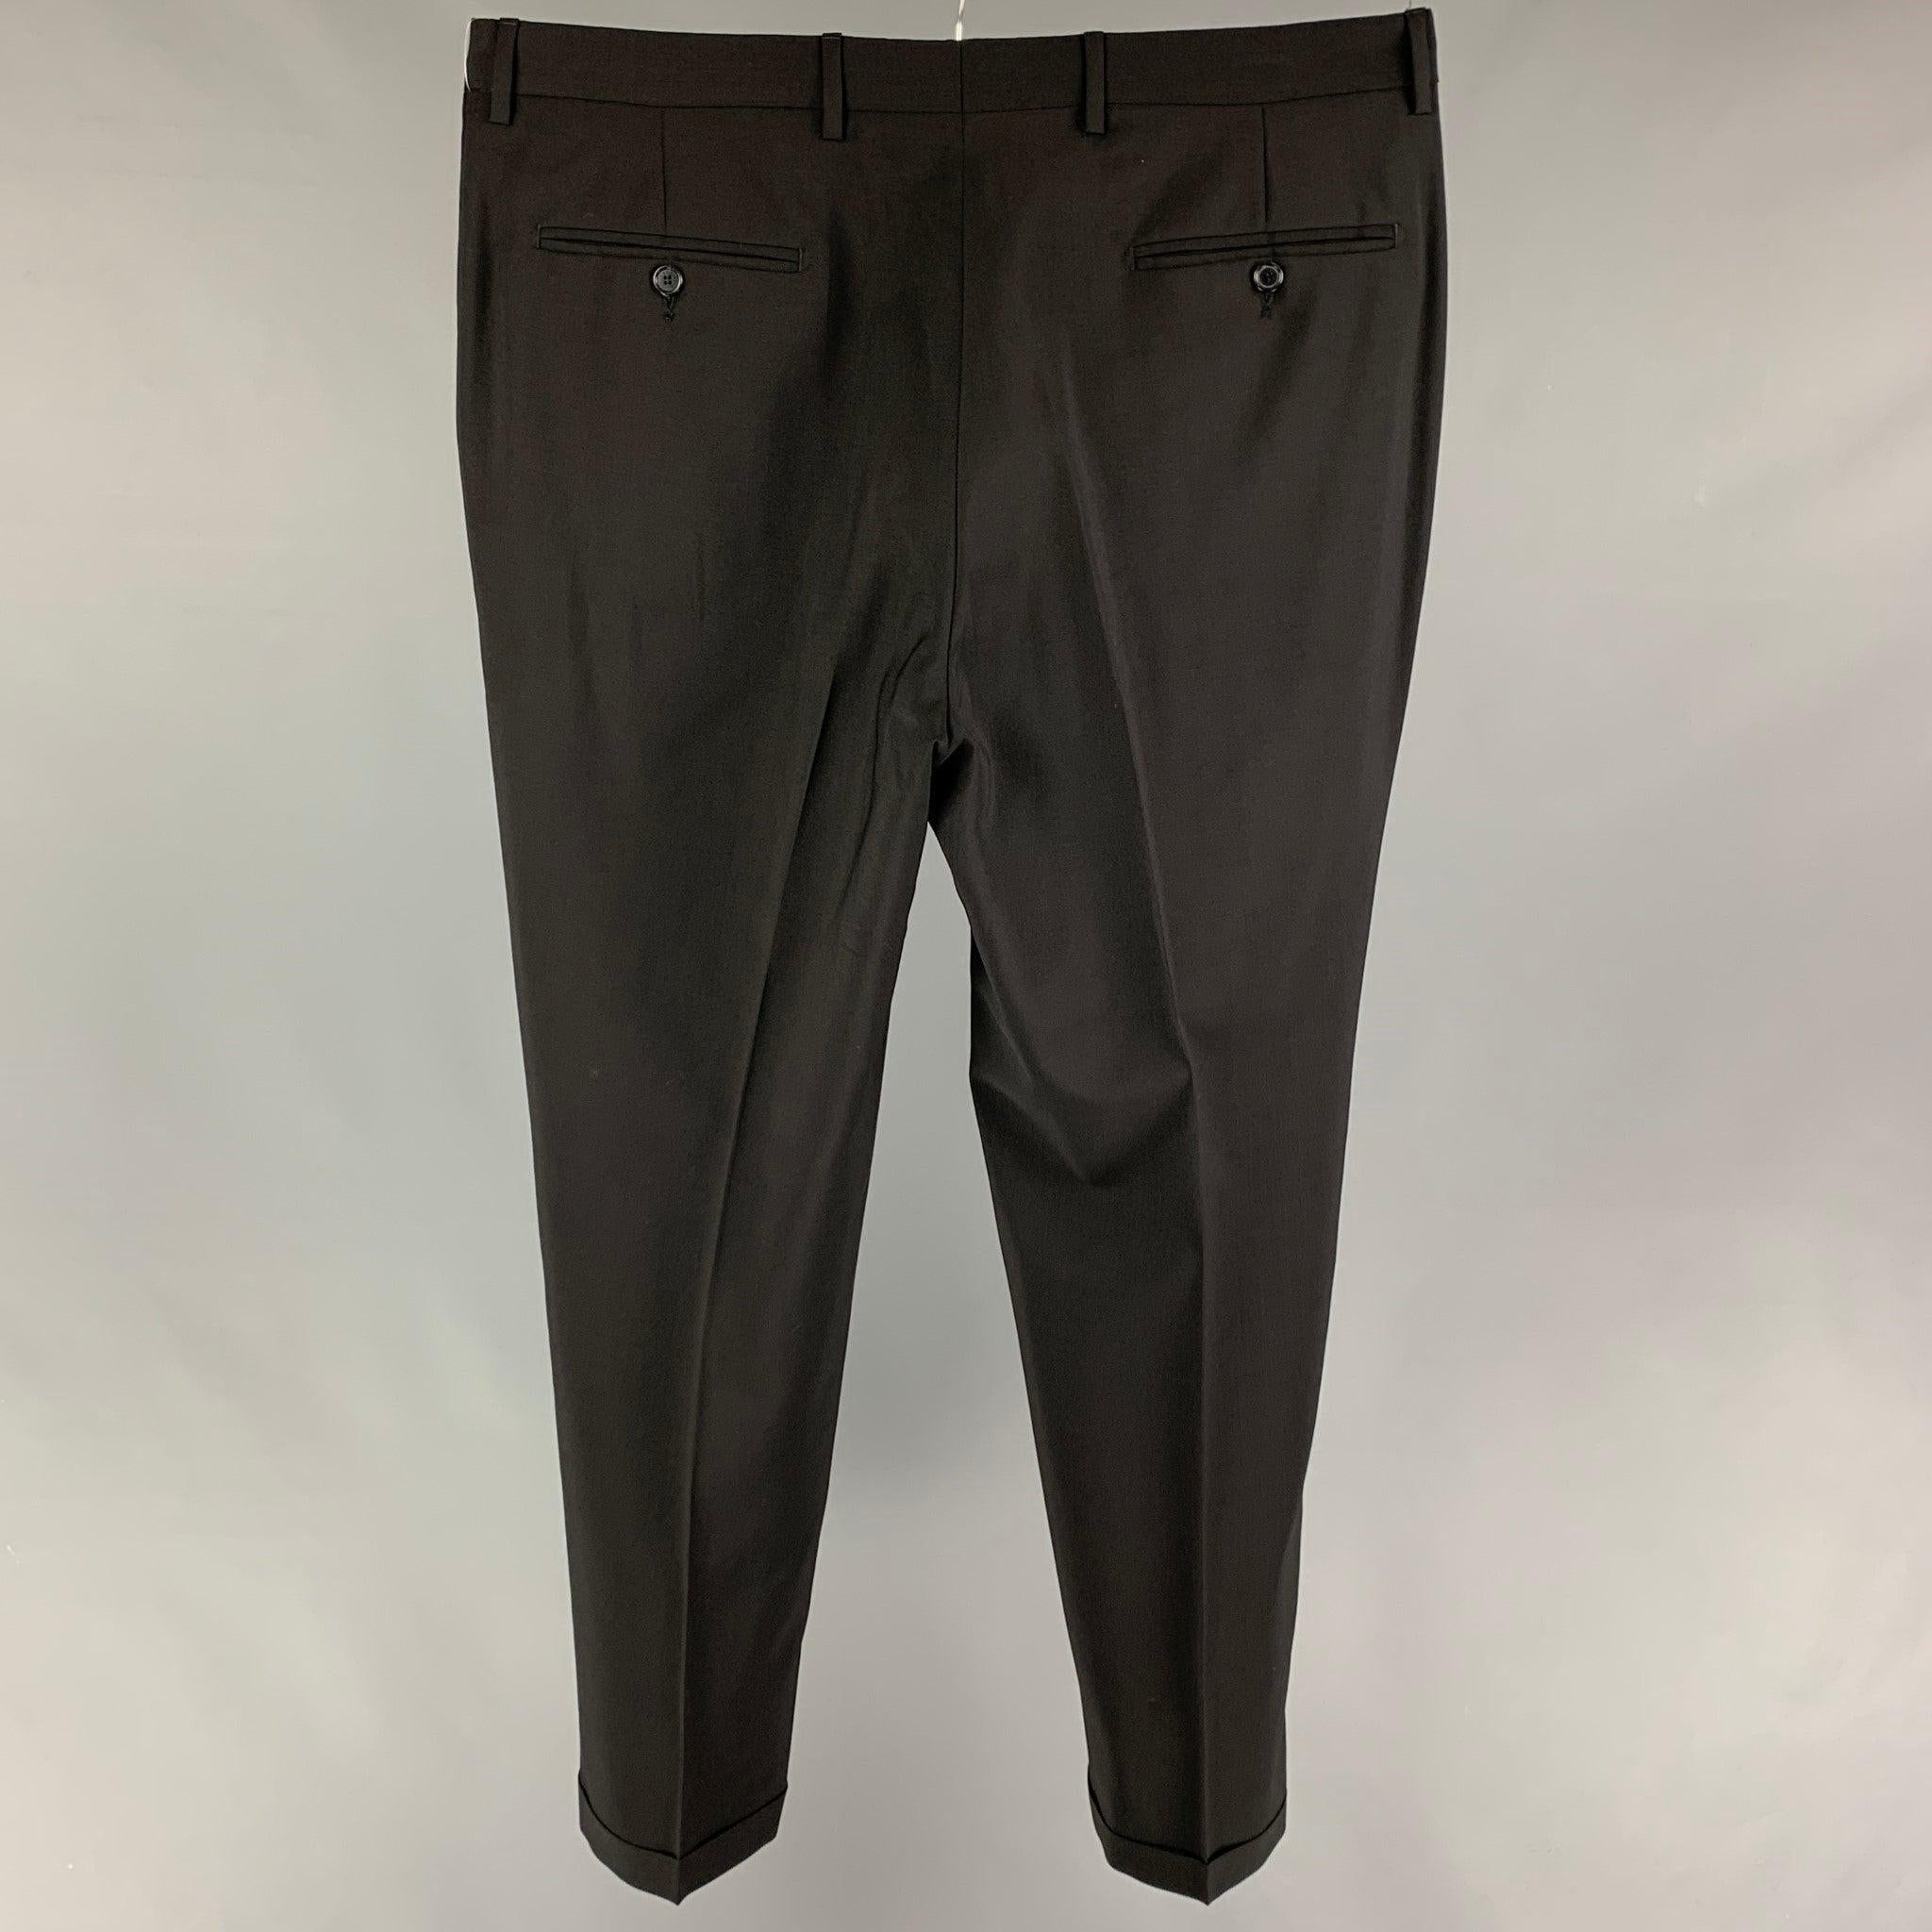 DOLCE & GABBANA dress pants comes in a black wool blend featuring a flat front and a zip fly closure. Made in Italy.
Very Good
Pre-Owned Condition. 

Marked:   54 

Measurements: 
  Waist: 38 inches  Rise: 12 inches  Inseam: 32 inches 

  
  
